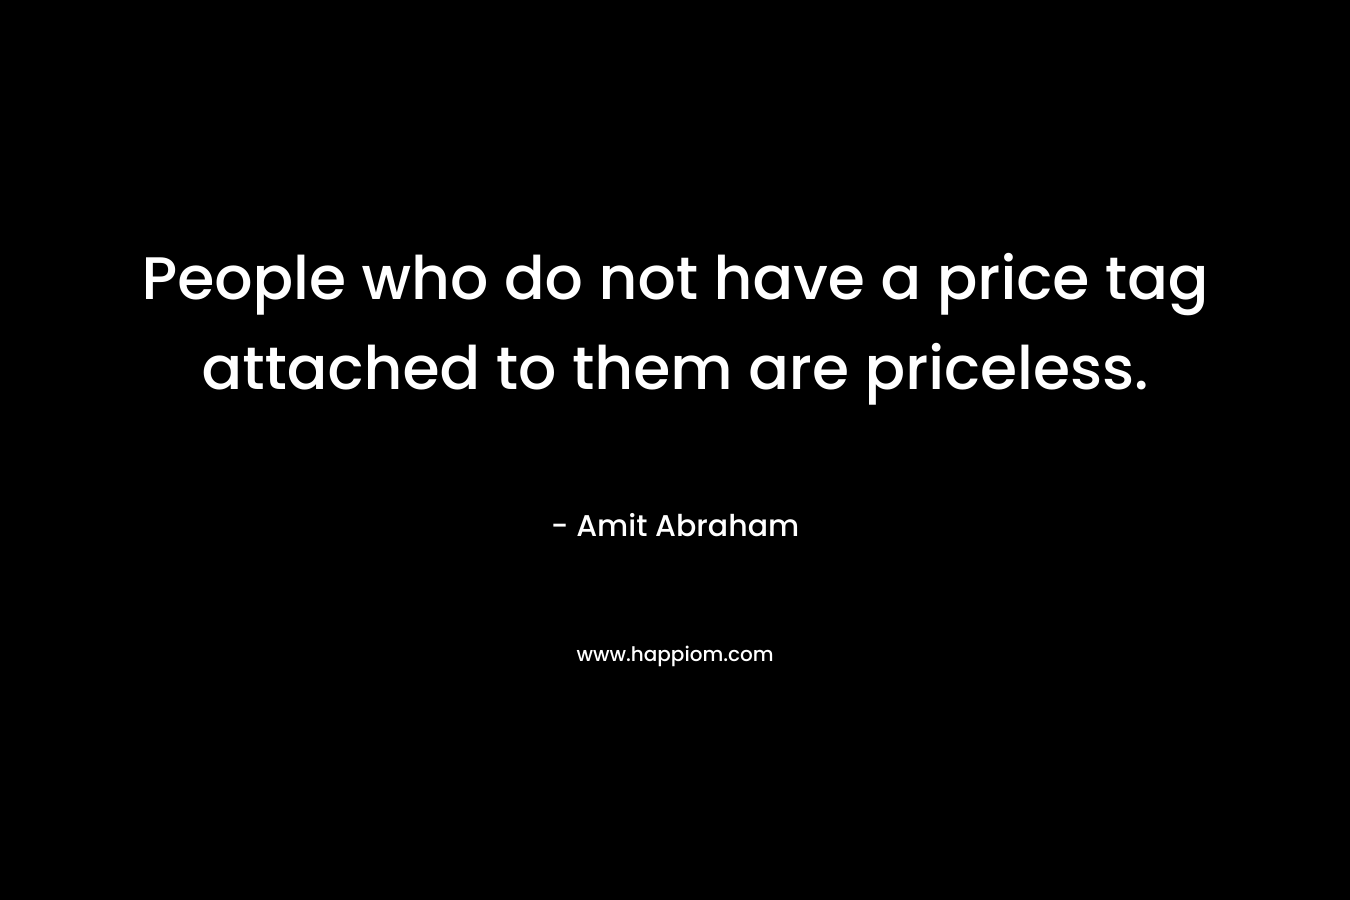 People who do not have a price tag attached to them are priceless. – Amit Abraham